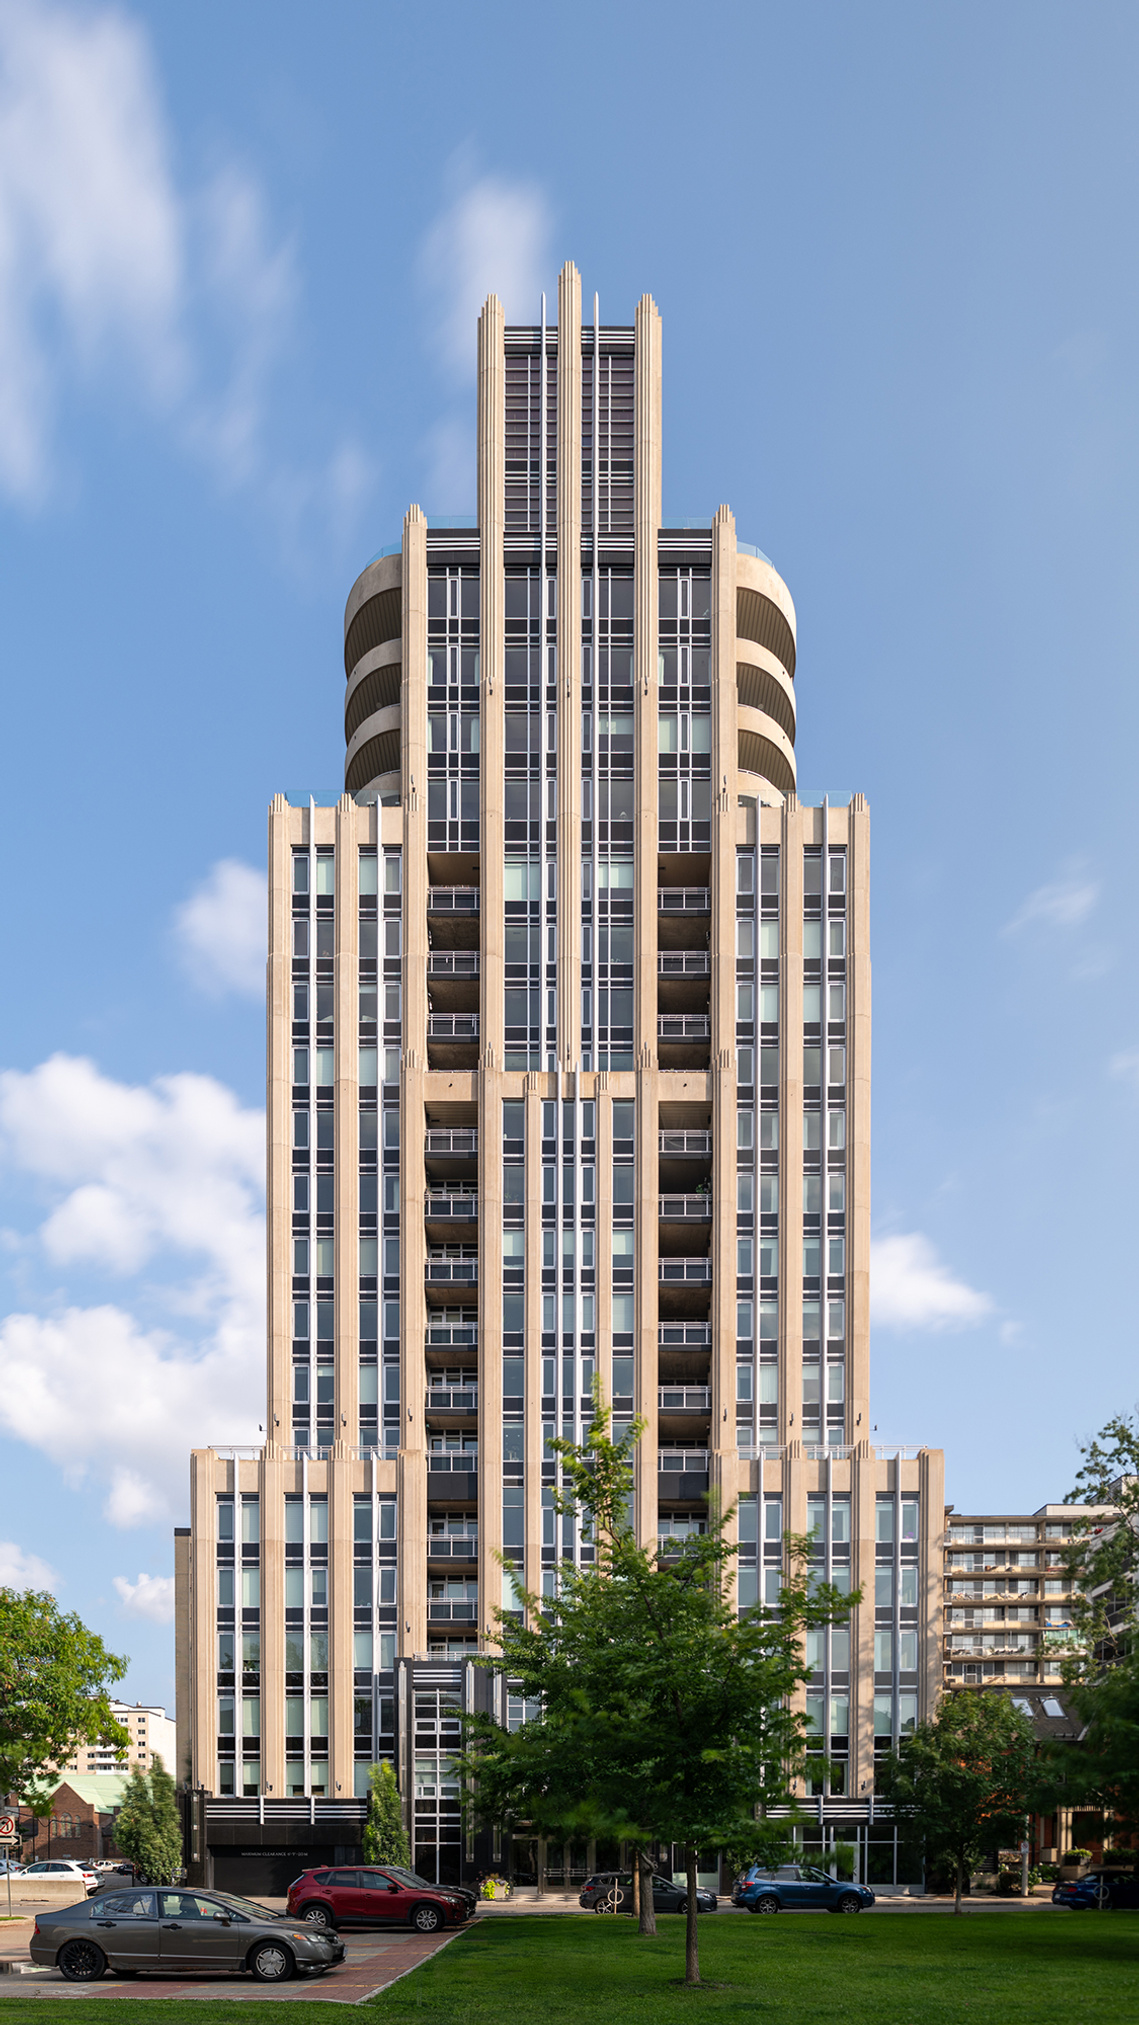 Condo tower in downtown Ottawa PPOC accepted image for architectural photography by Frank Fenn IDEA3